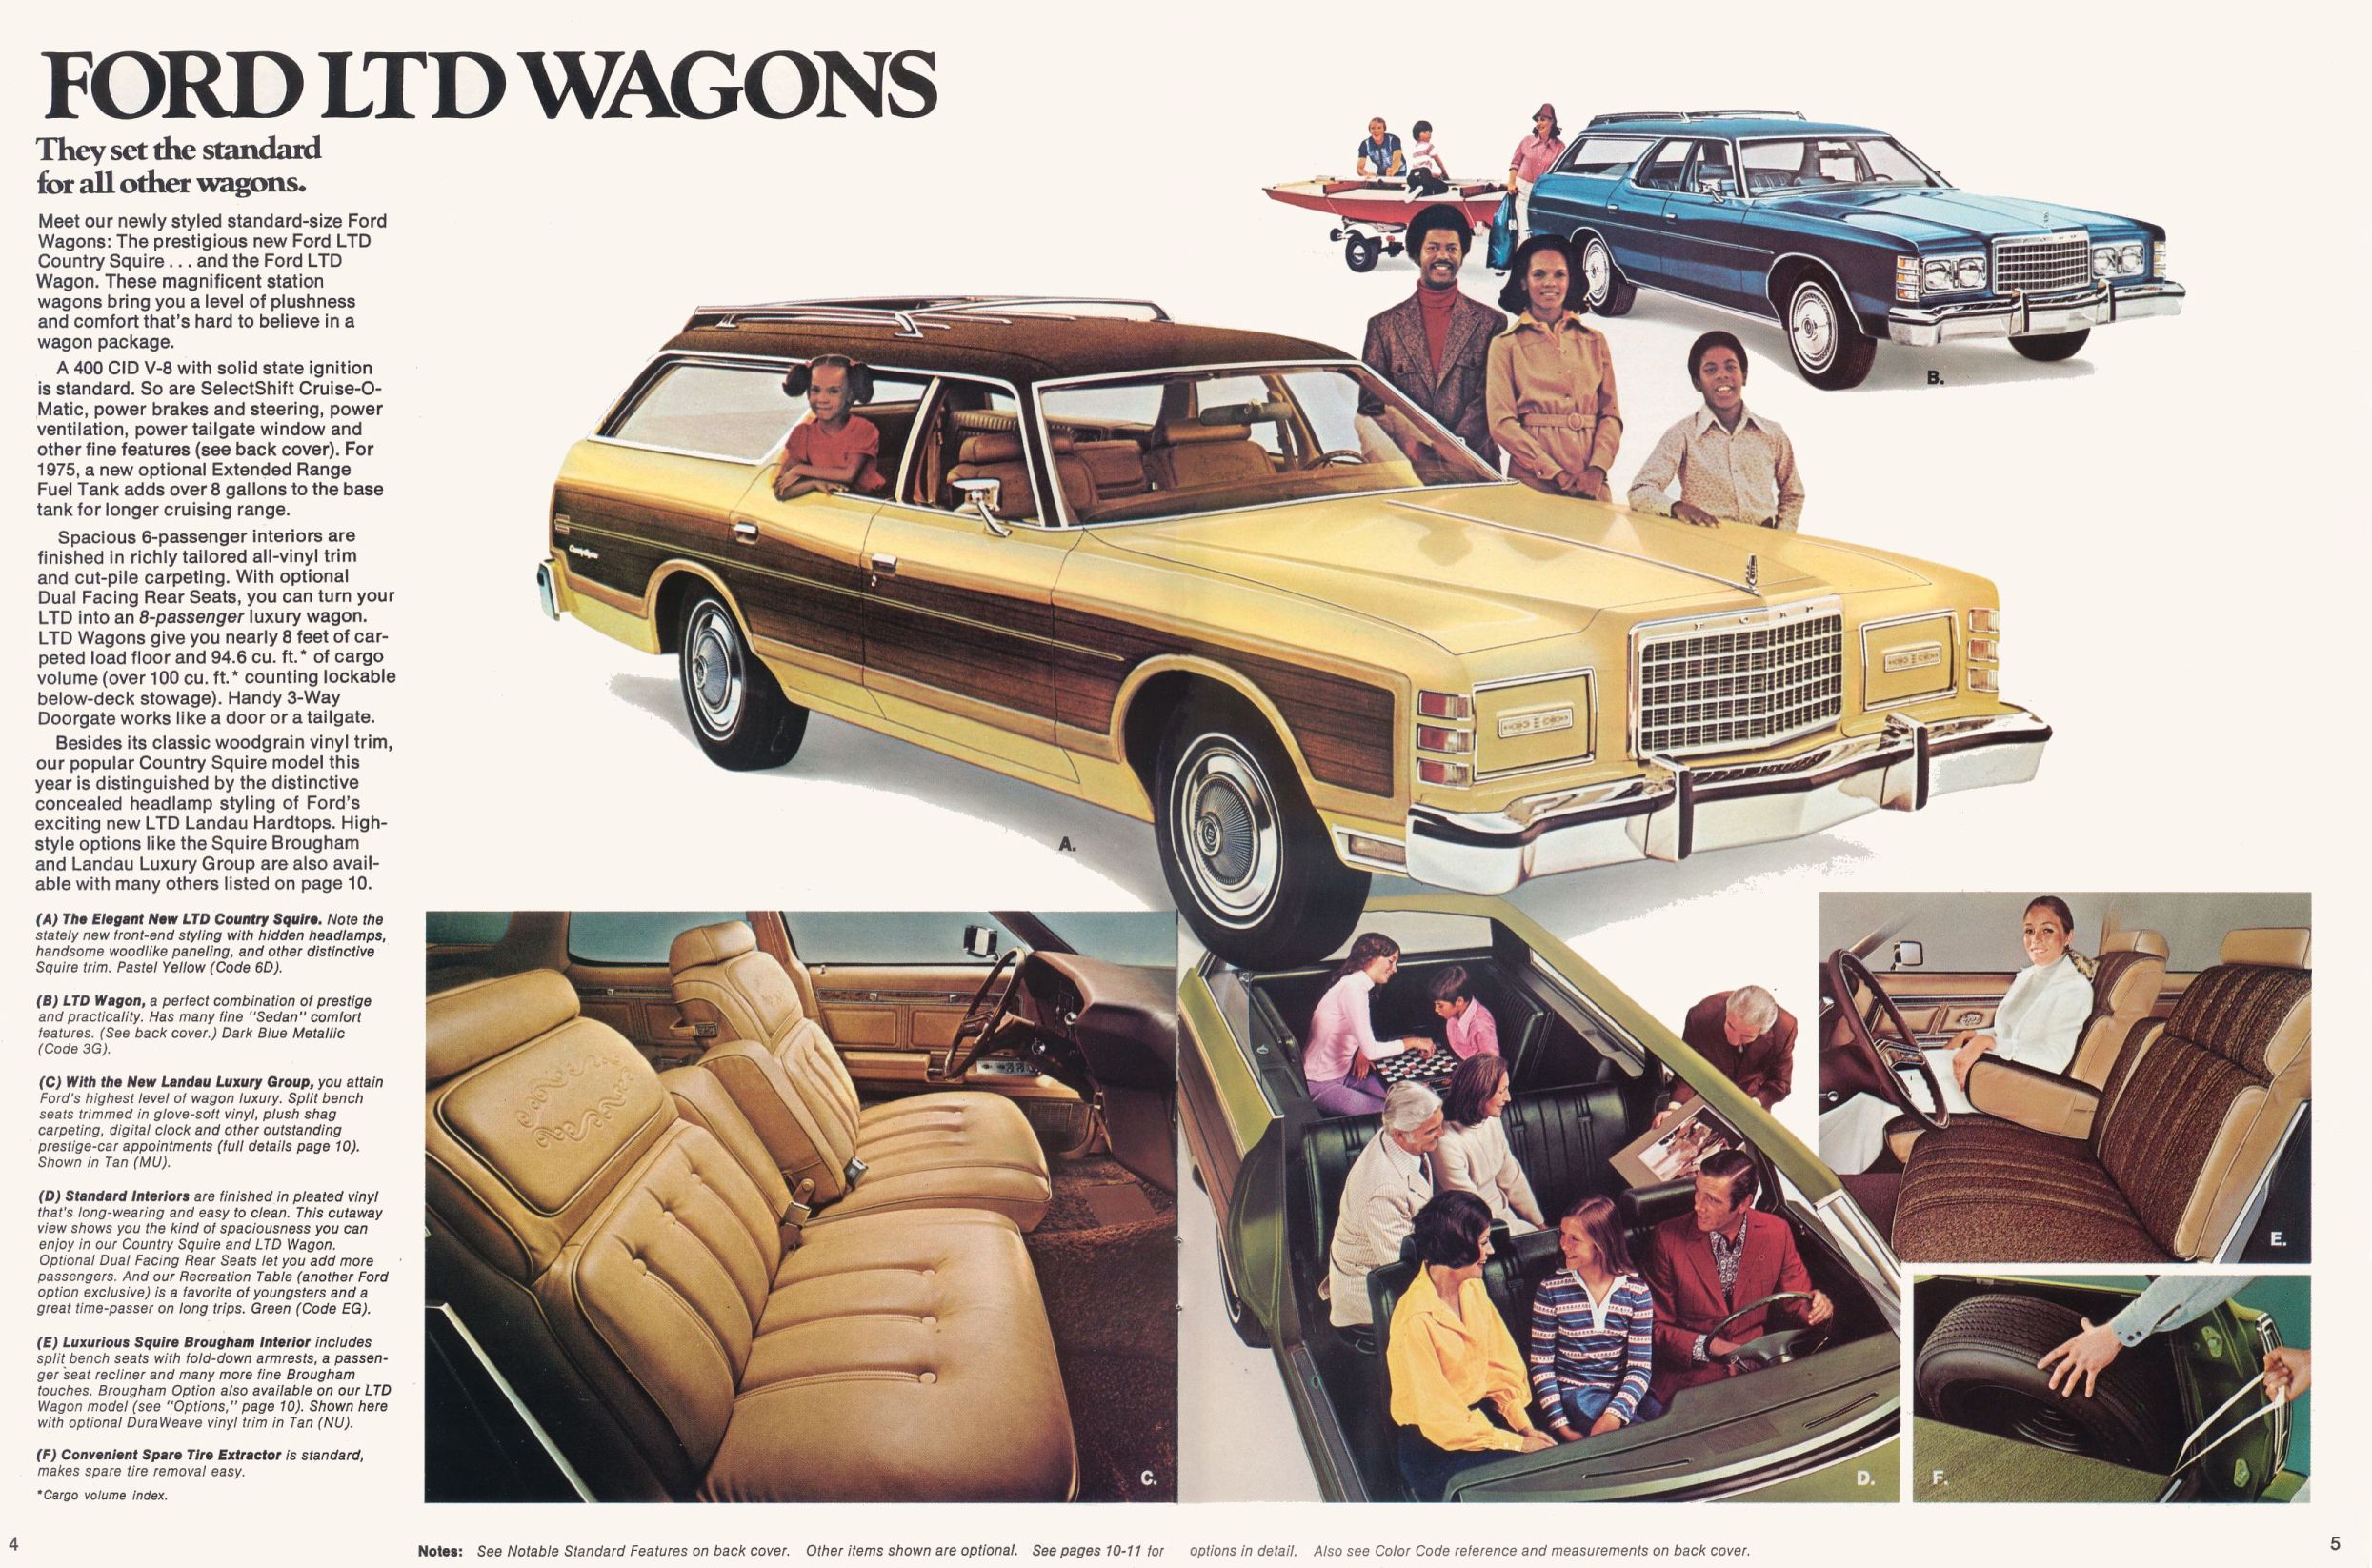 1975_Ford_Wagons-04-05